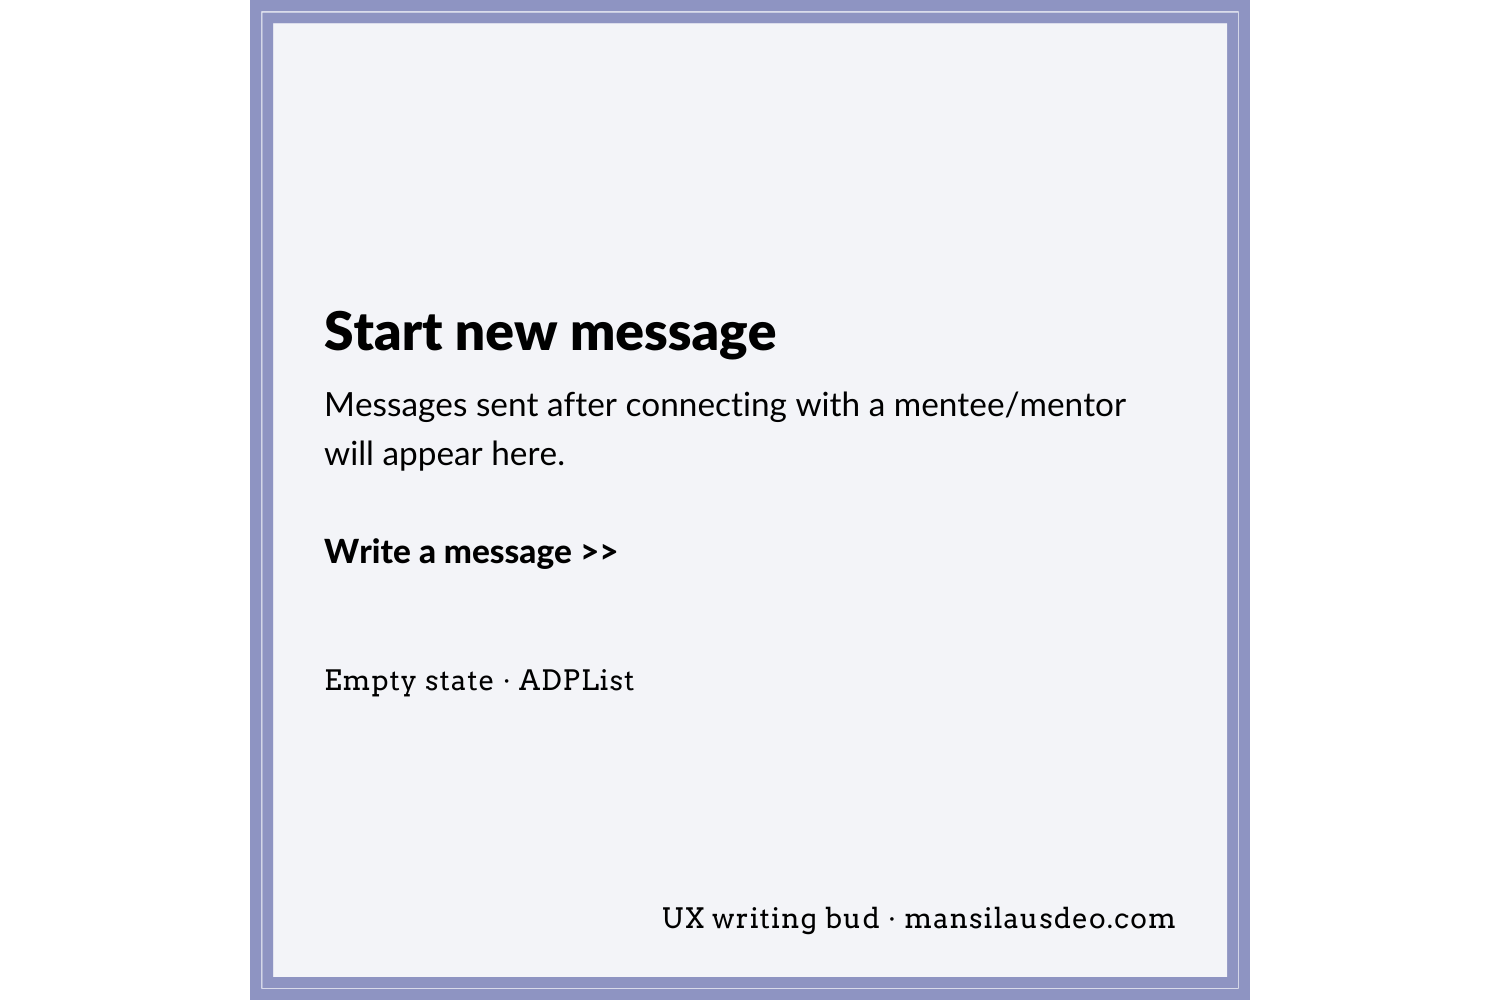 Start new message Messages sent after connecting with a mentee/mentor will appear here. Write a message >> UX Writing Bud